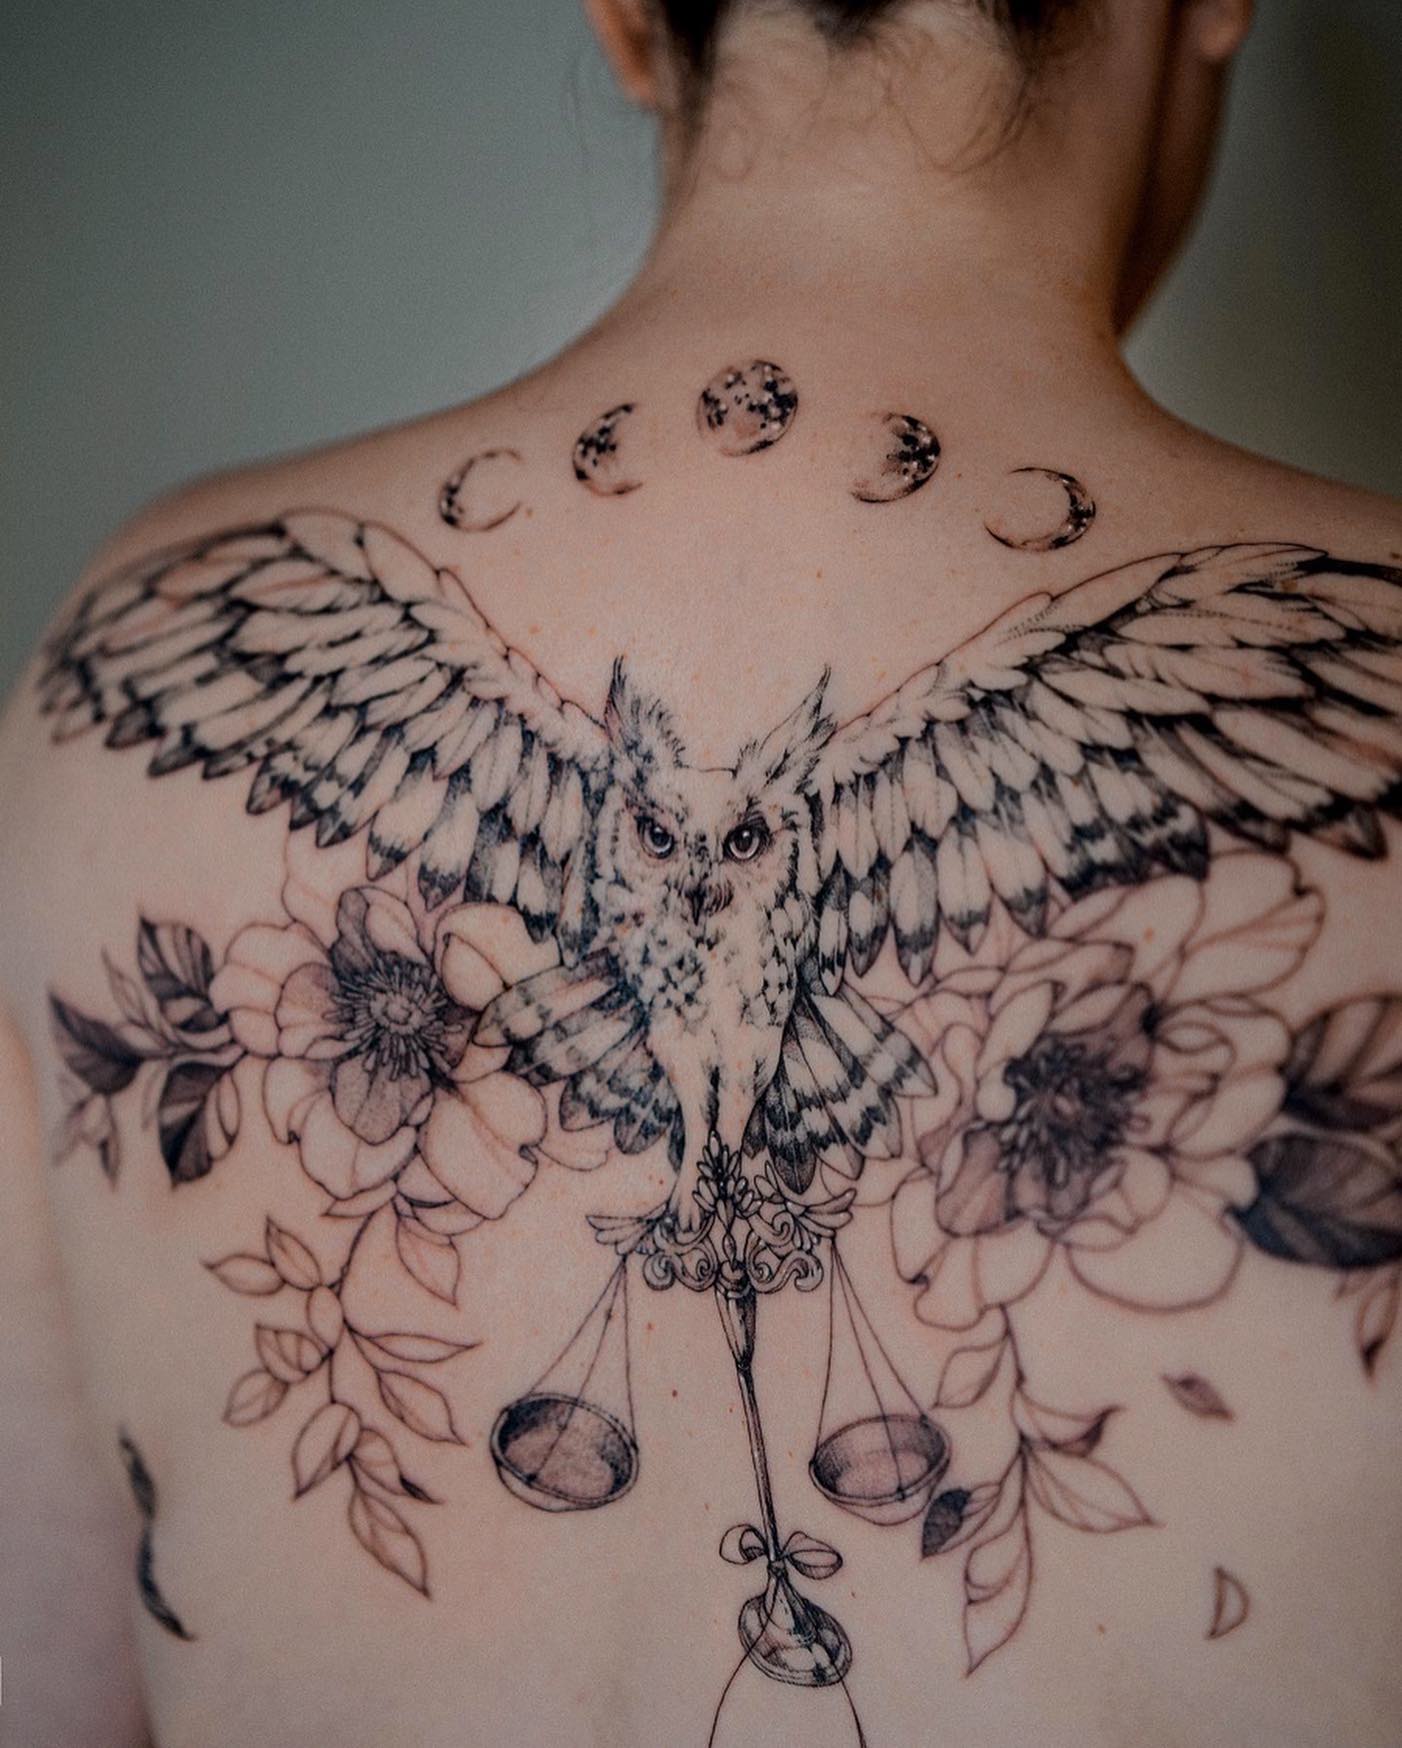 Tattoo tagged with: animal, back, big, bird, facebook, harpy eagle, sketch  work, twitter, victormontaghini | inked-app.com